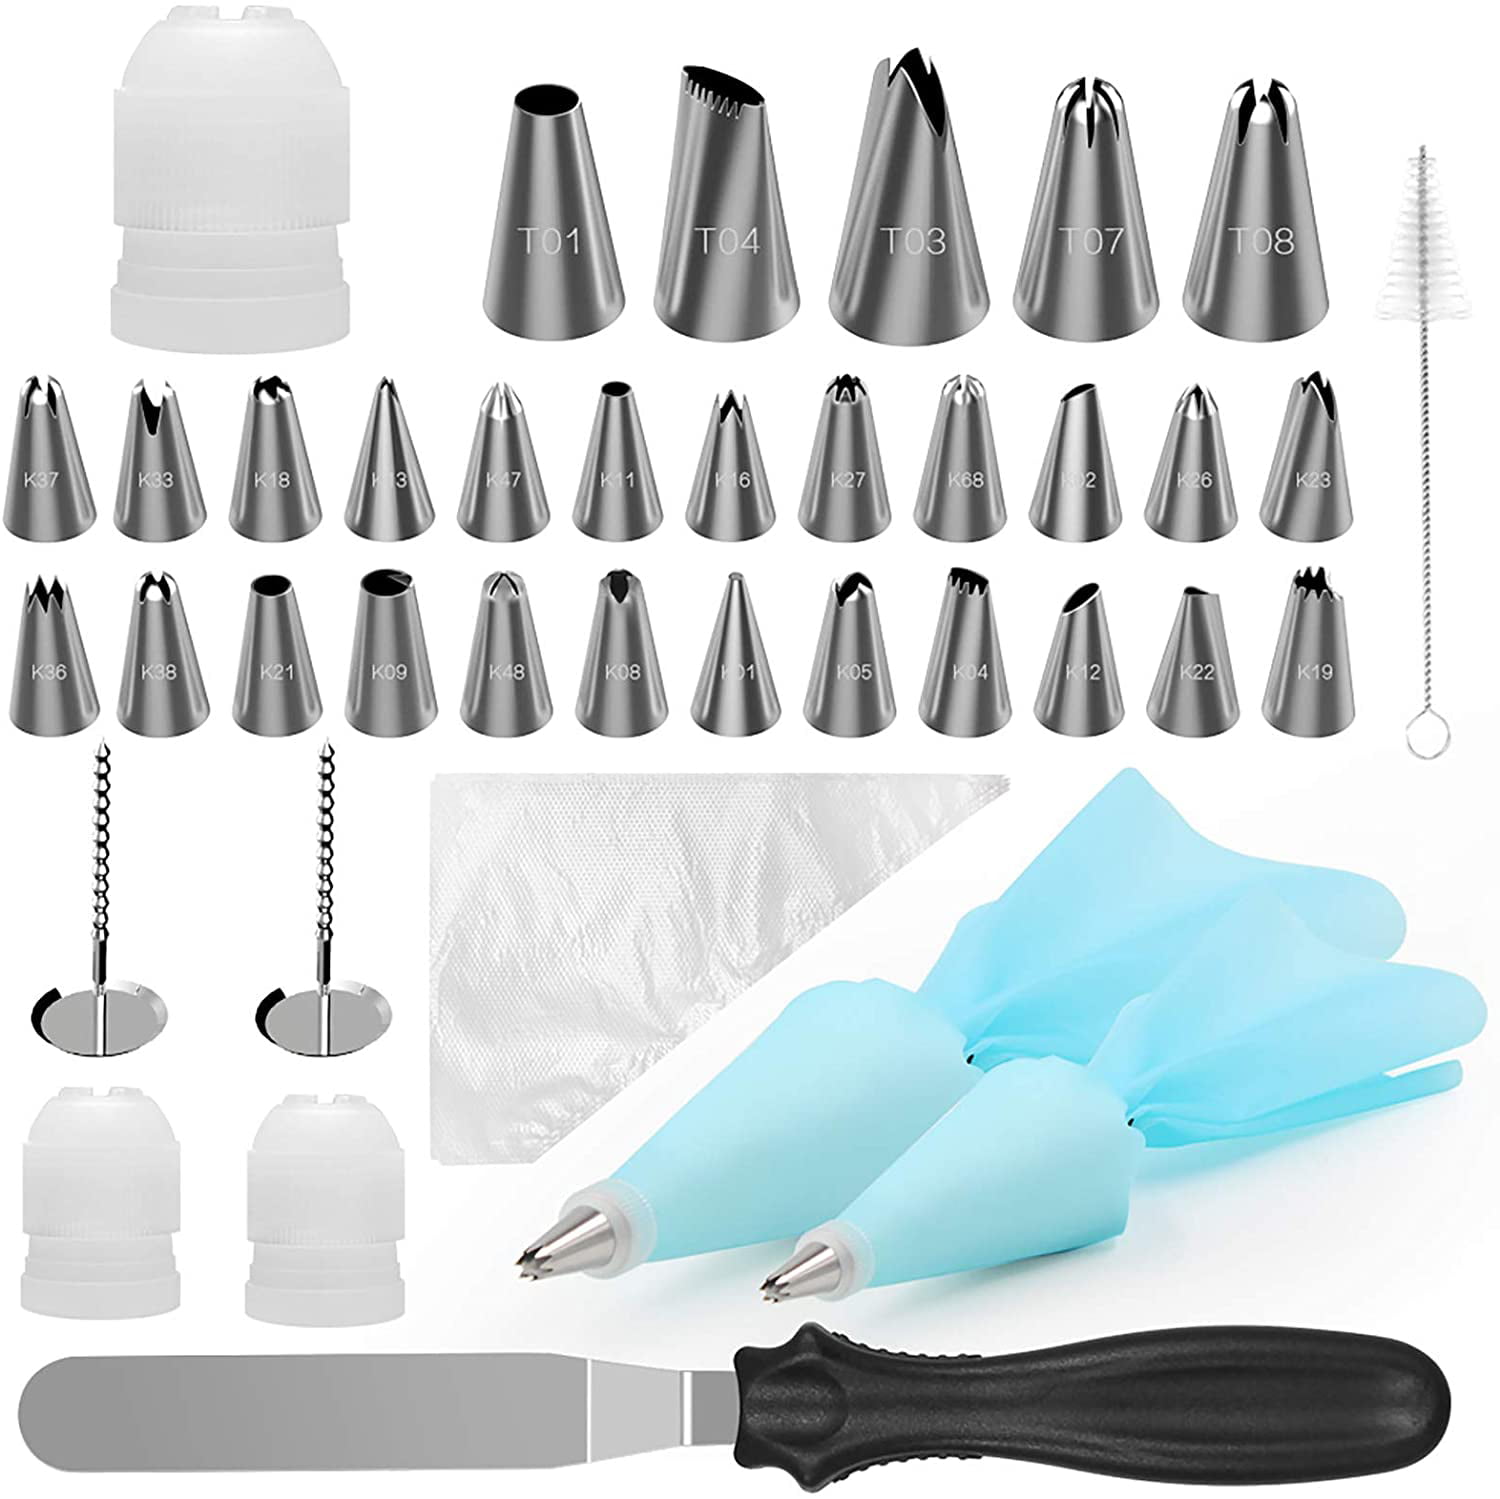 3 Scrapers Baking Accessories for DIY Cakes Cupcake Cookies Dessert 2 Reusable Piping Bags 33PCS Cake Decorating Supplies Kit with 24 Stainless Steel Piping Nozzles Tips 2 Plastic Couplers 